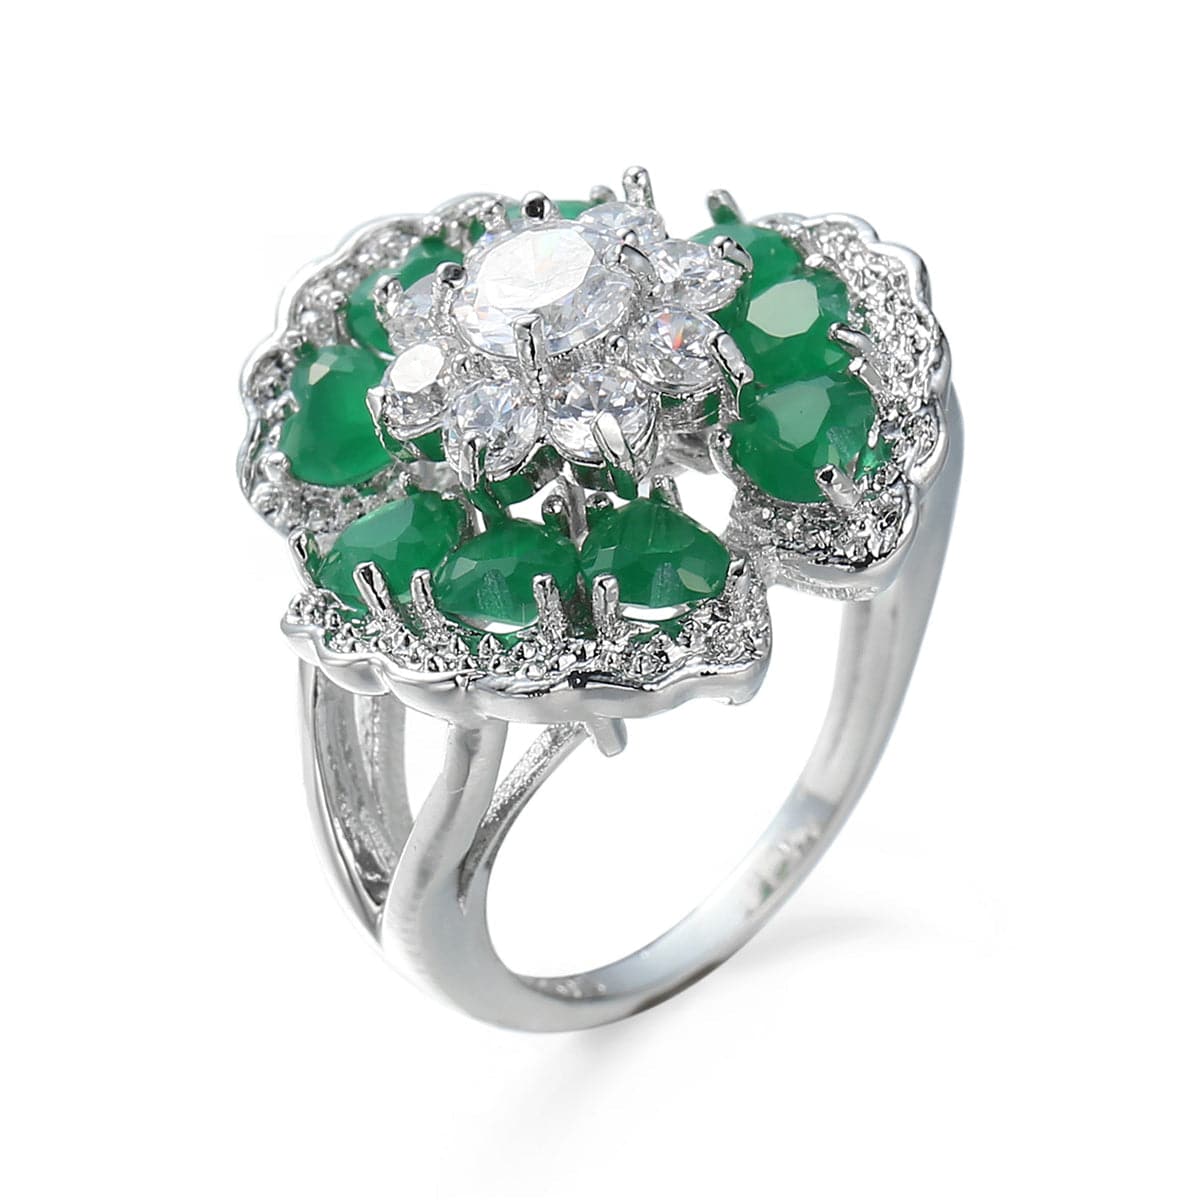 Green & White Cubic Zirconia Ornate Floral Ring